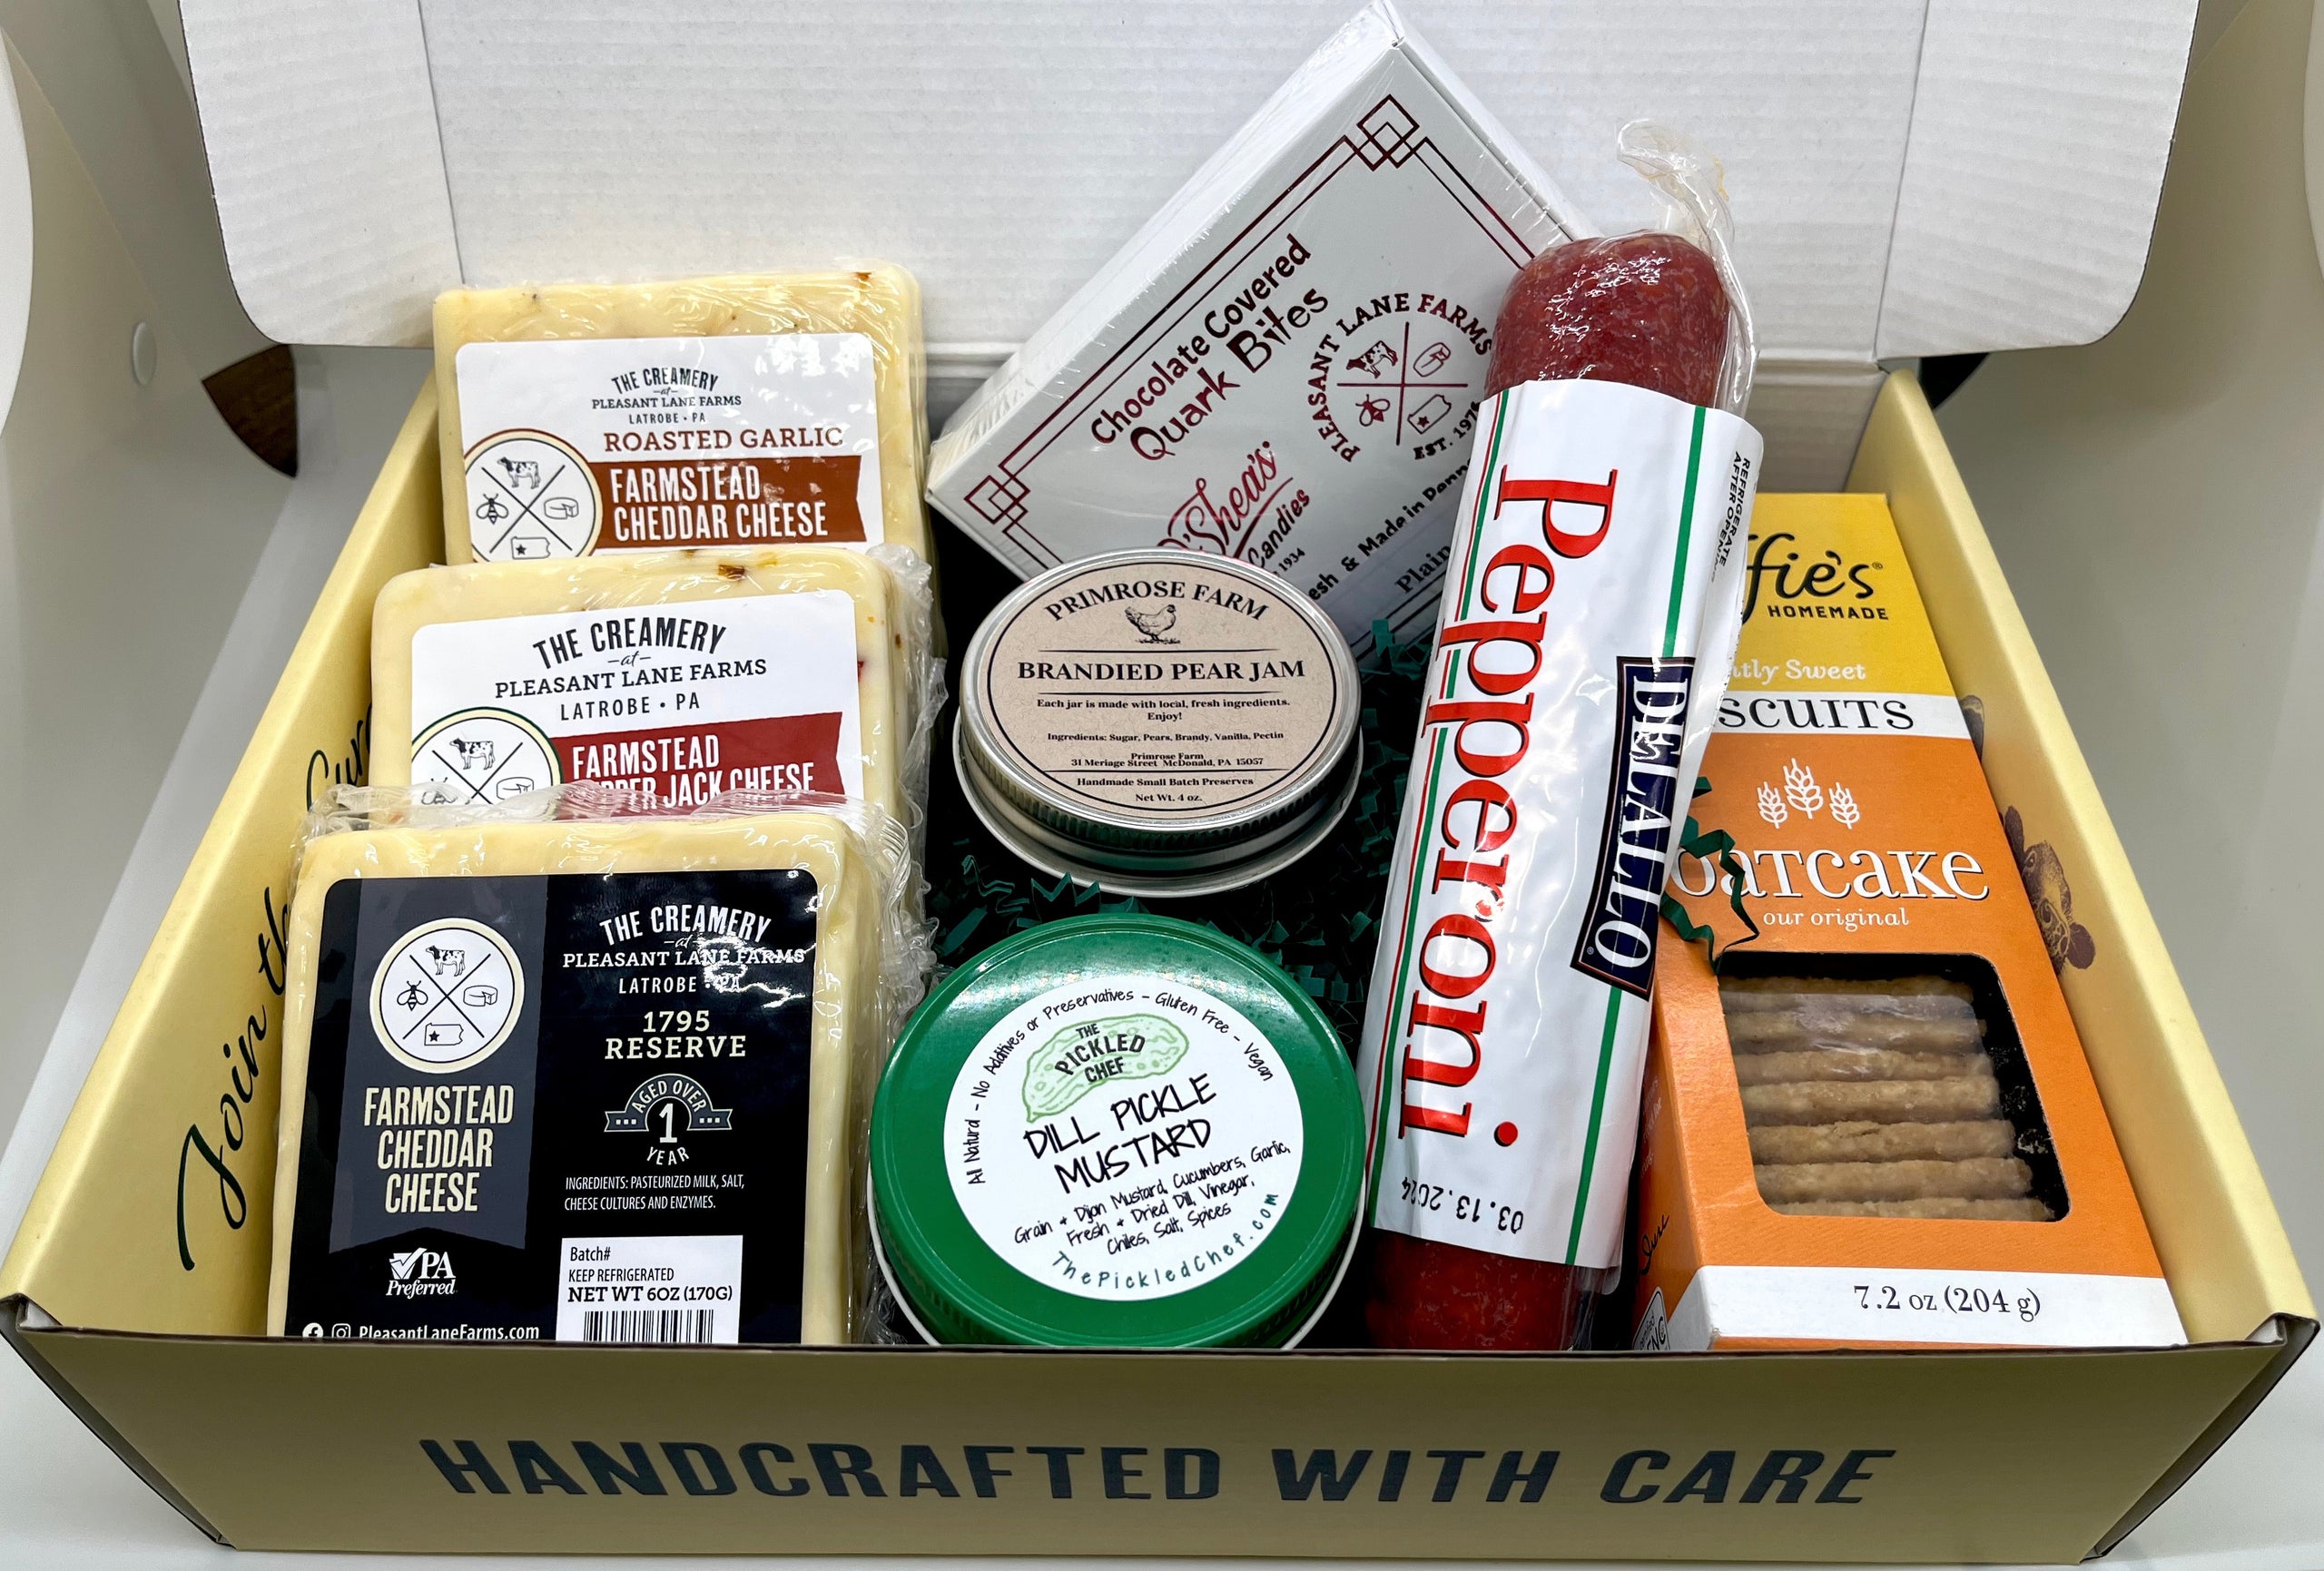 Charcuterie Lunchbox – Cabot Creamery